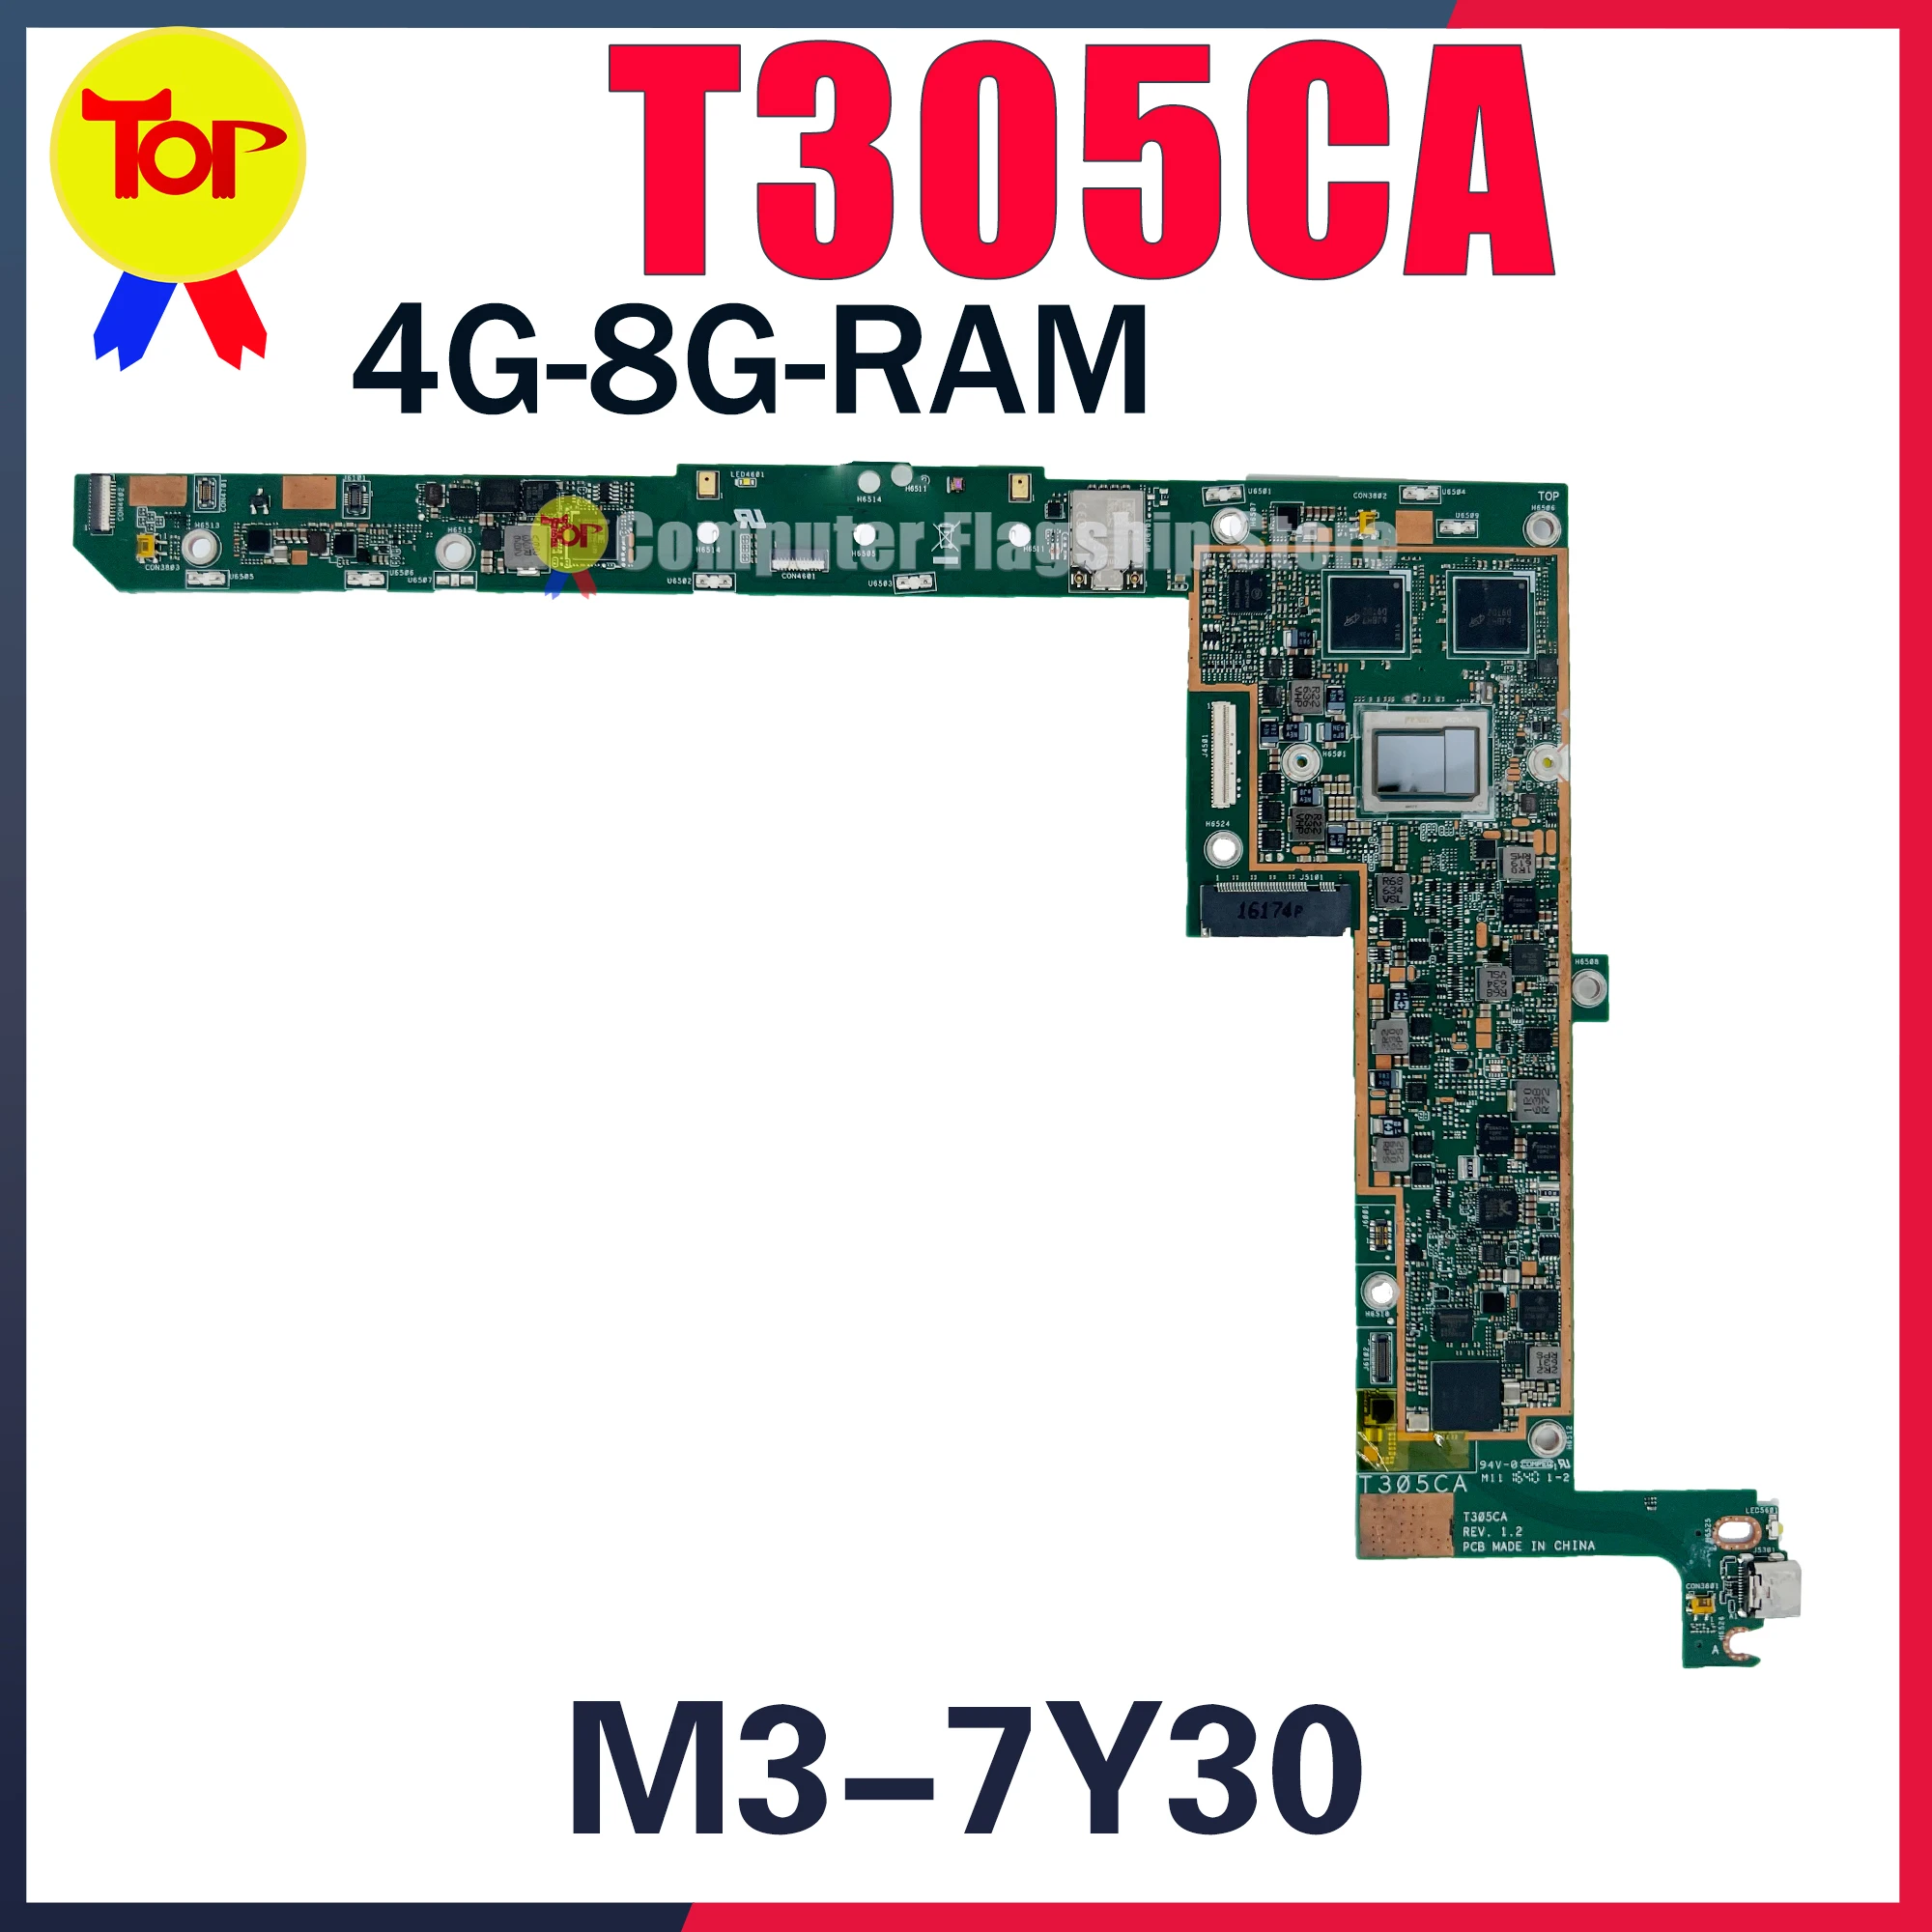 

T305CA Laptop Motherboard For ASUS Transformer 3 T305C M3-7Y30 I7-7Y75 4G OR 8G-RAM Mainboard 100% Working TEST